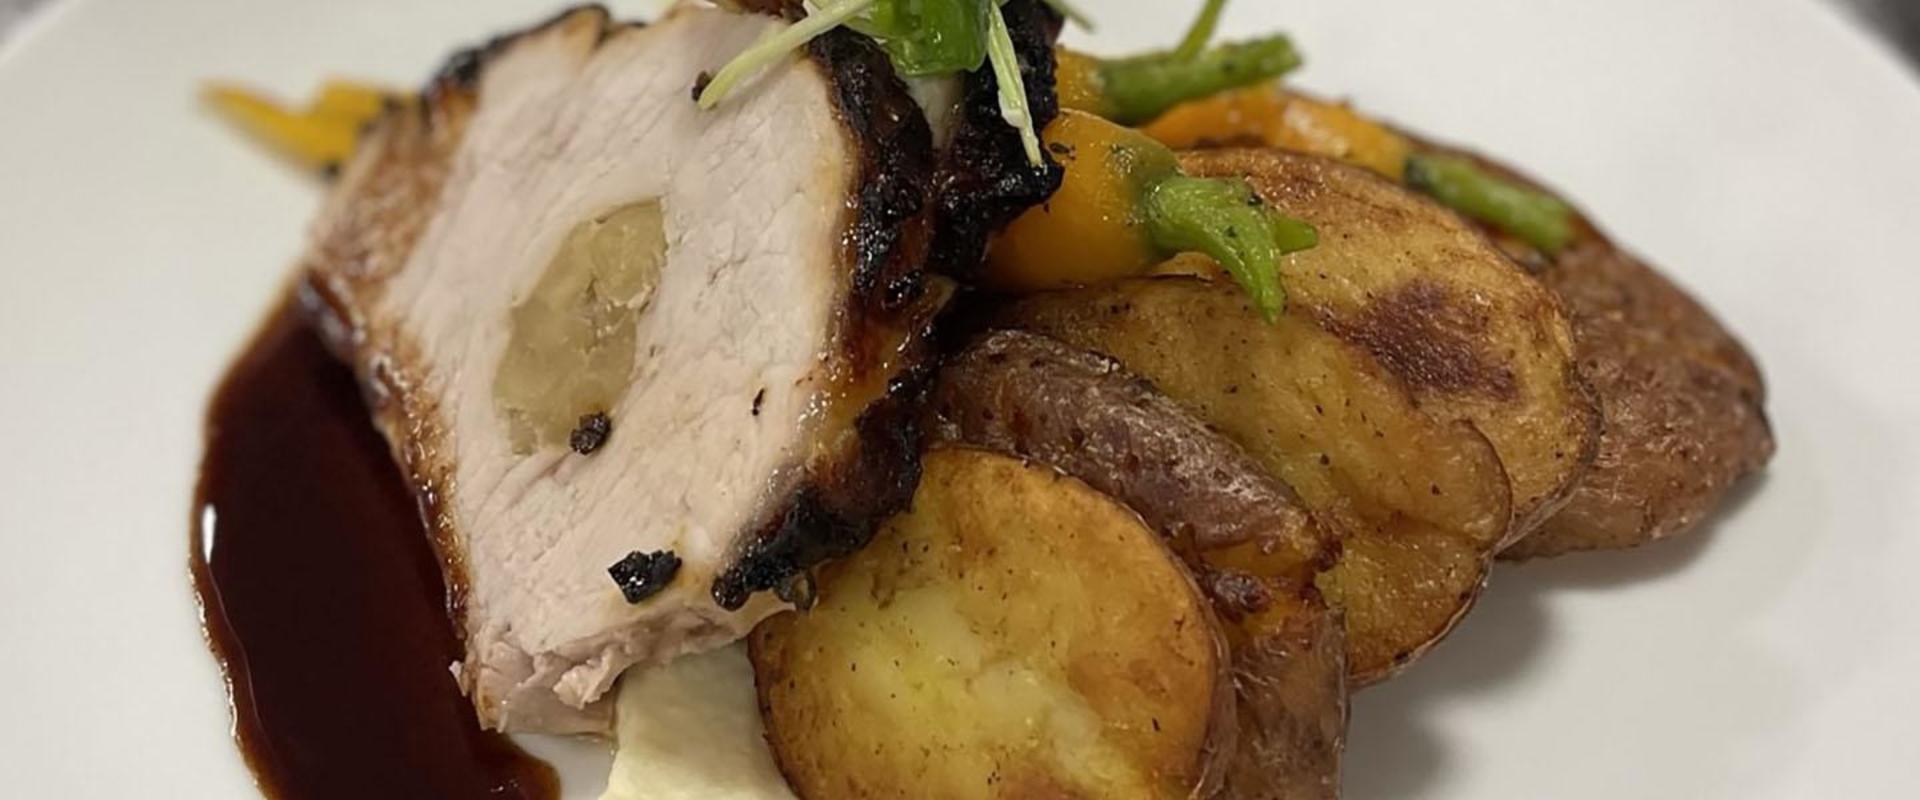 One of the dishes from Penn State's winning submission: bone-in stuffed pork chop with cranberry demi-glace, smashed fingerling potatoes, roasted carrots, and celery root puree. 